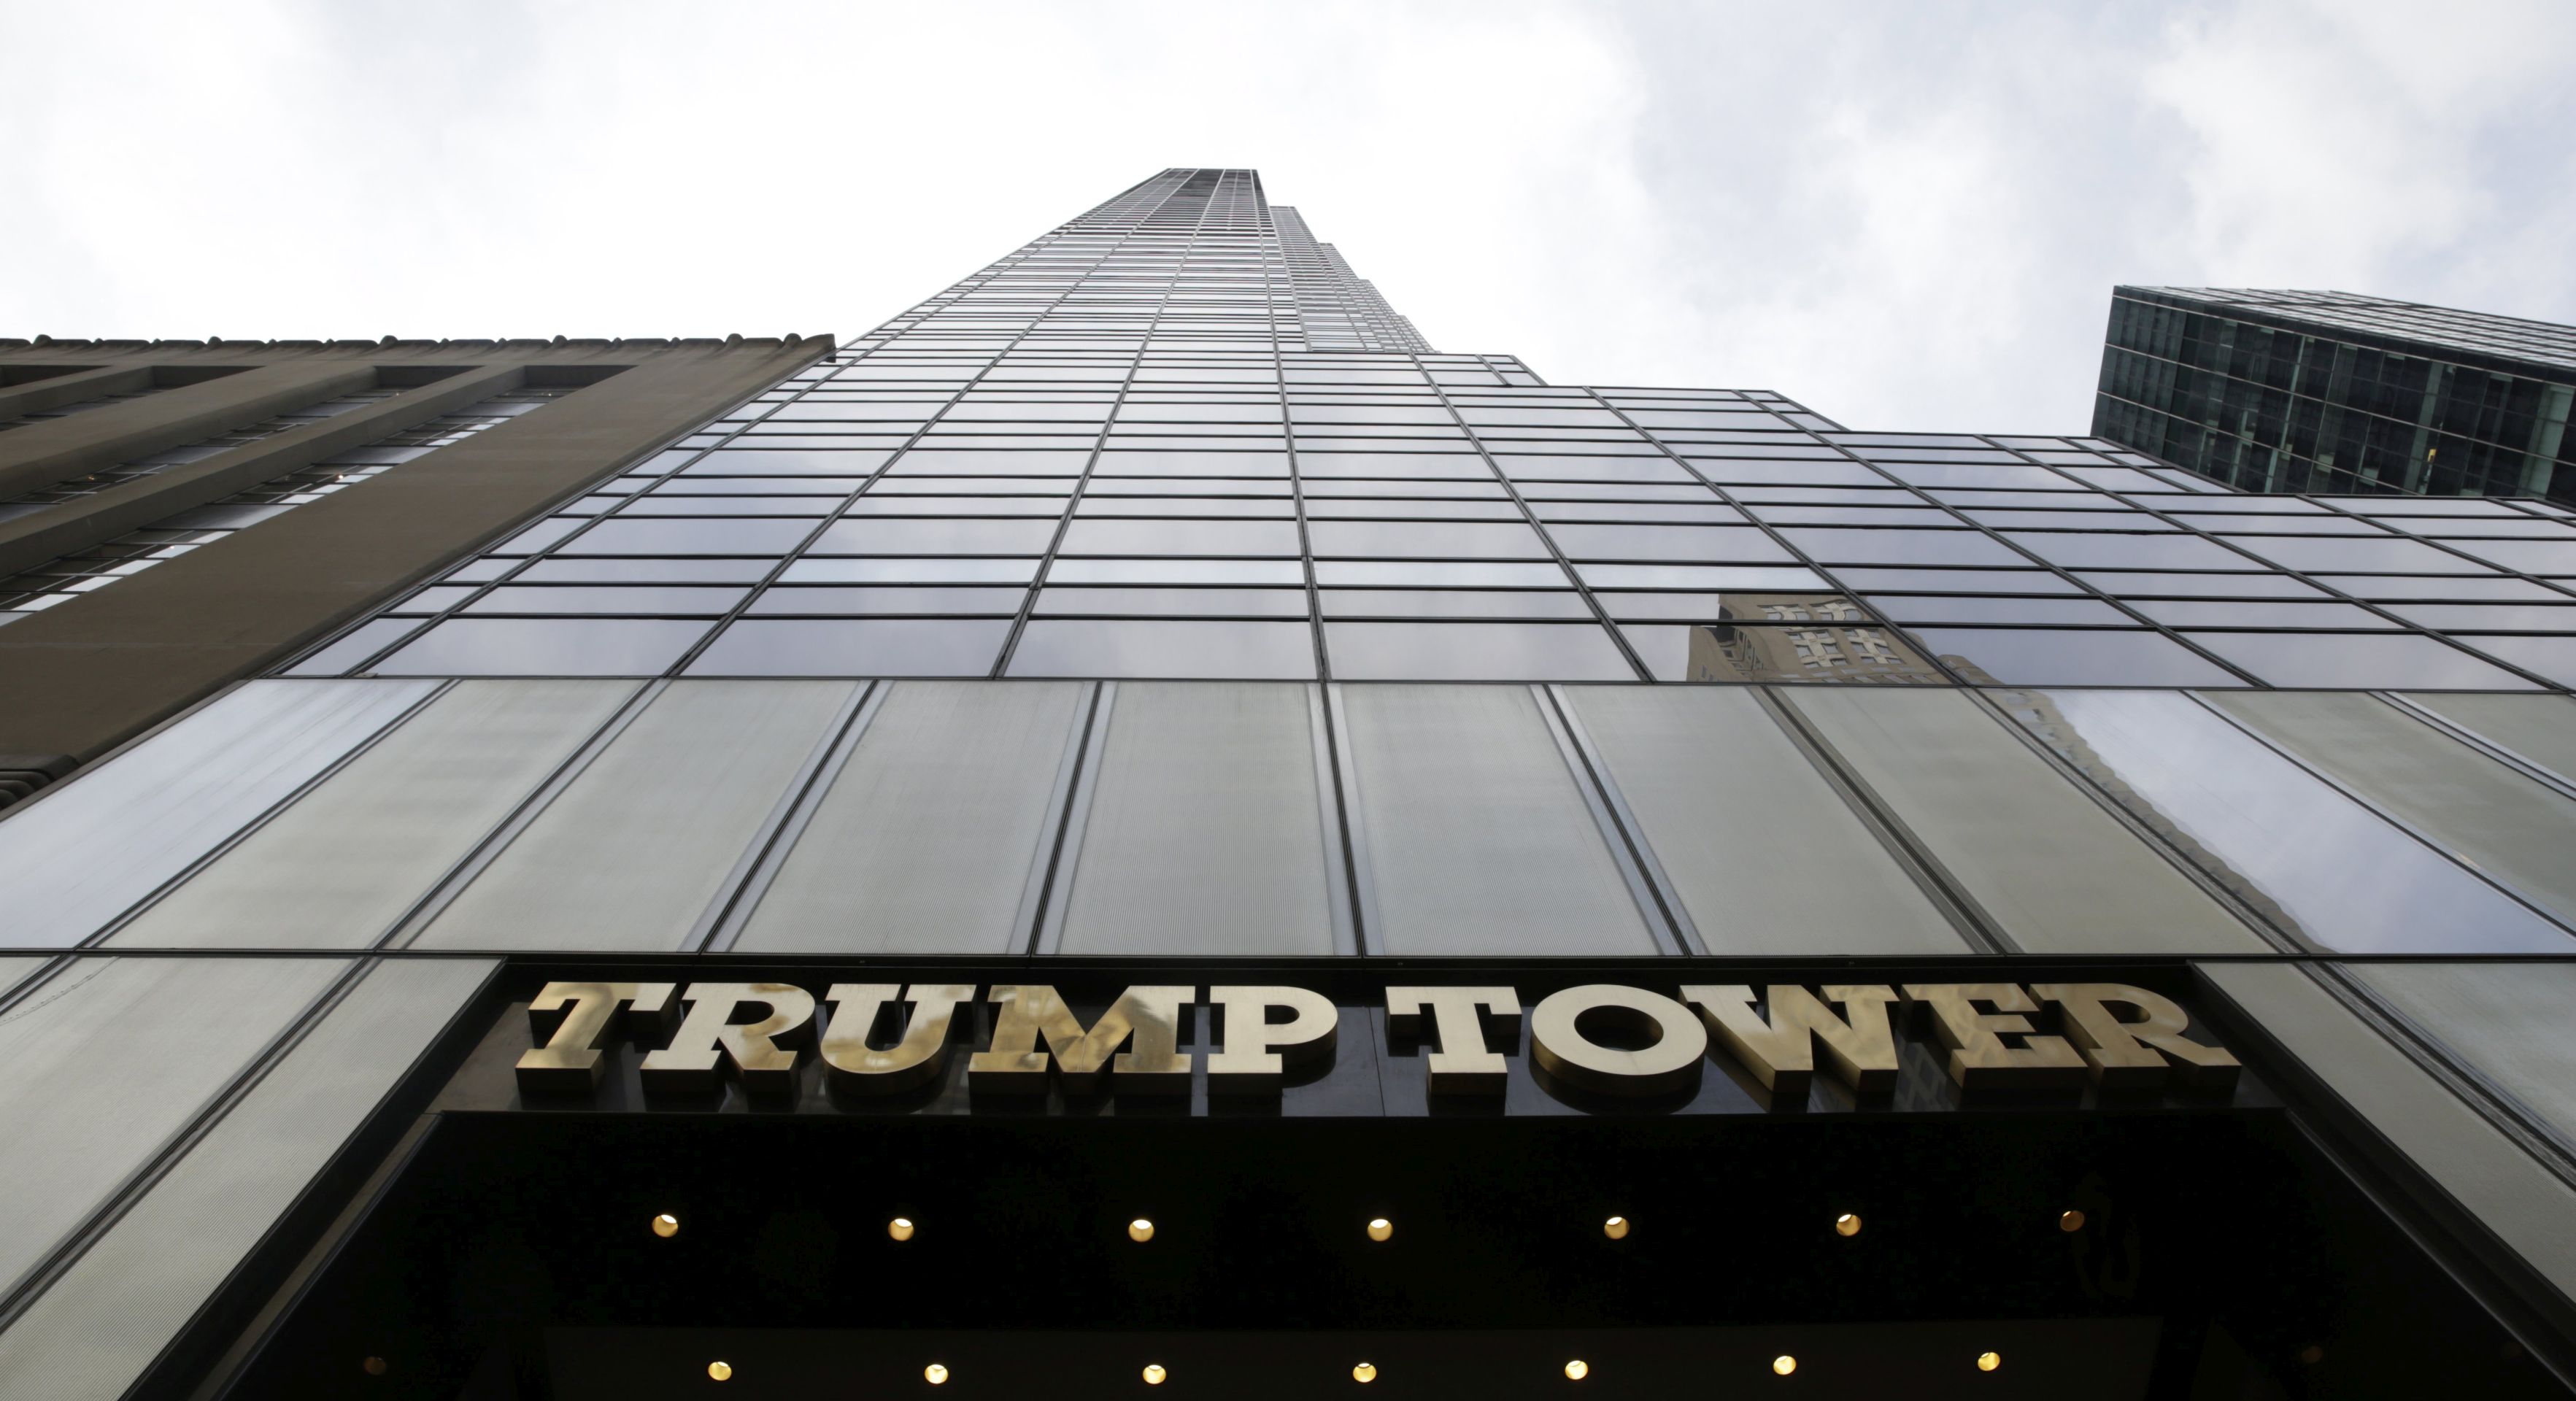 epa05832611 (FILE) - A general view of Trump Tower in New York, New York, USA, 31 May 2016 (reissued 06 March 2017). US President Trump on 05 March 2017 demanded from Congress to investigate an alleged wire-tapping of Trump's offices by Obama during his election campaign. Obama's spokesman has dismissed Trump's claims as 'simply false' and Trump not offered any evidence for his claims.  EPA/JASON SZENES